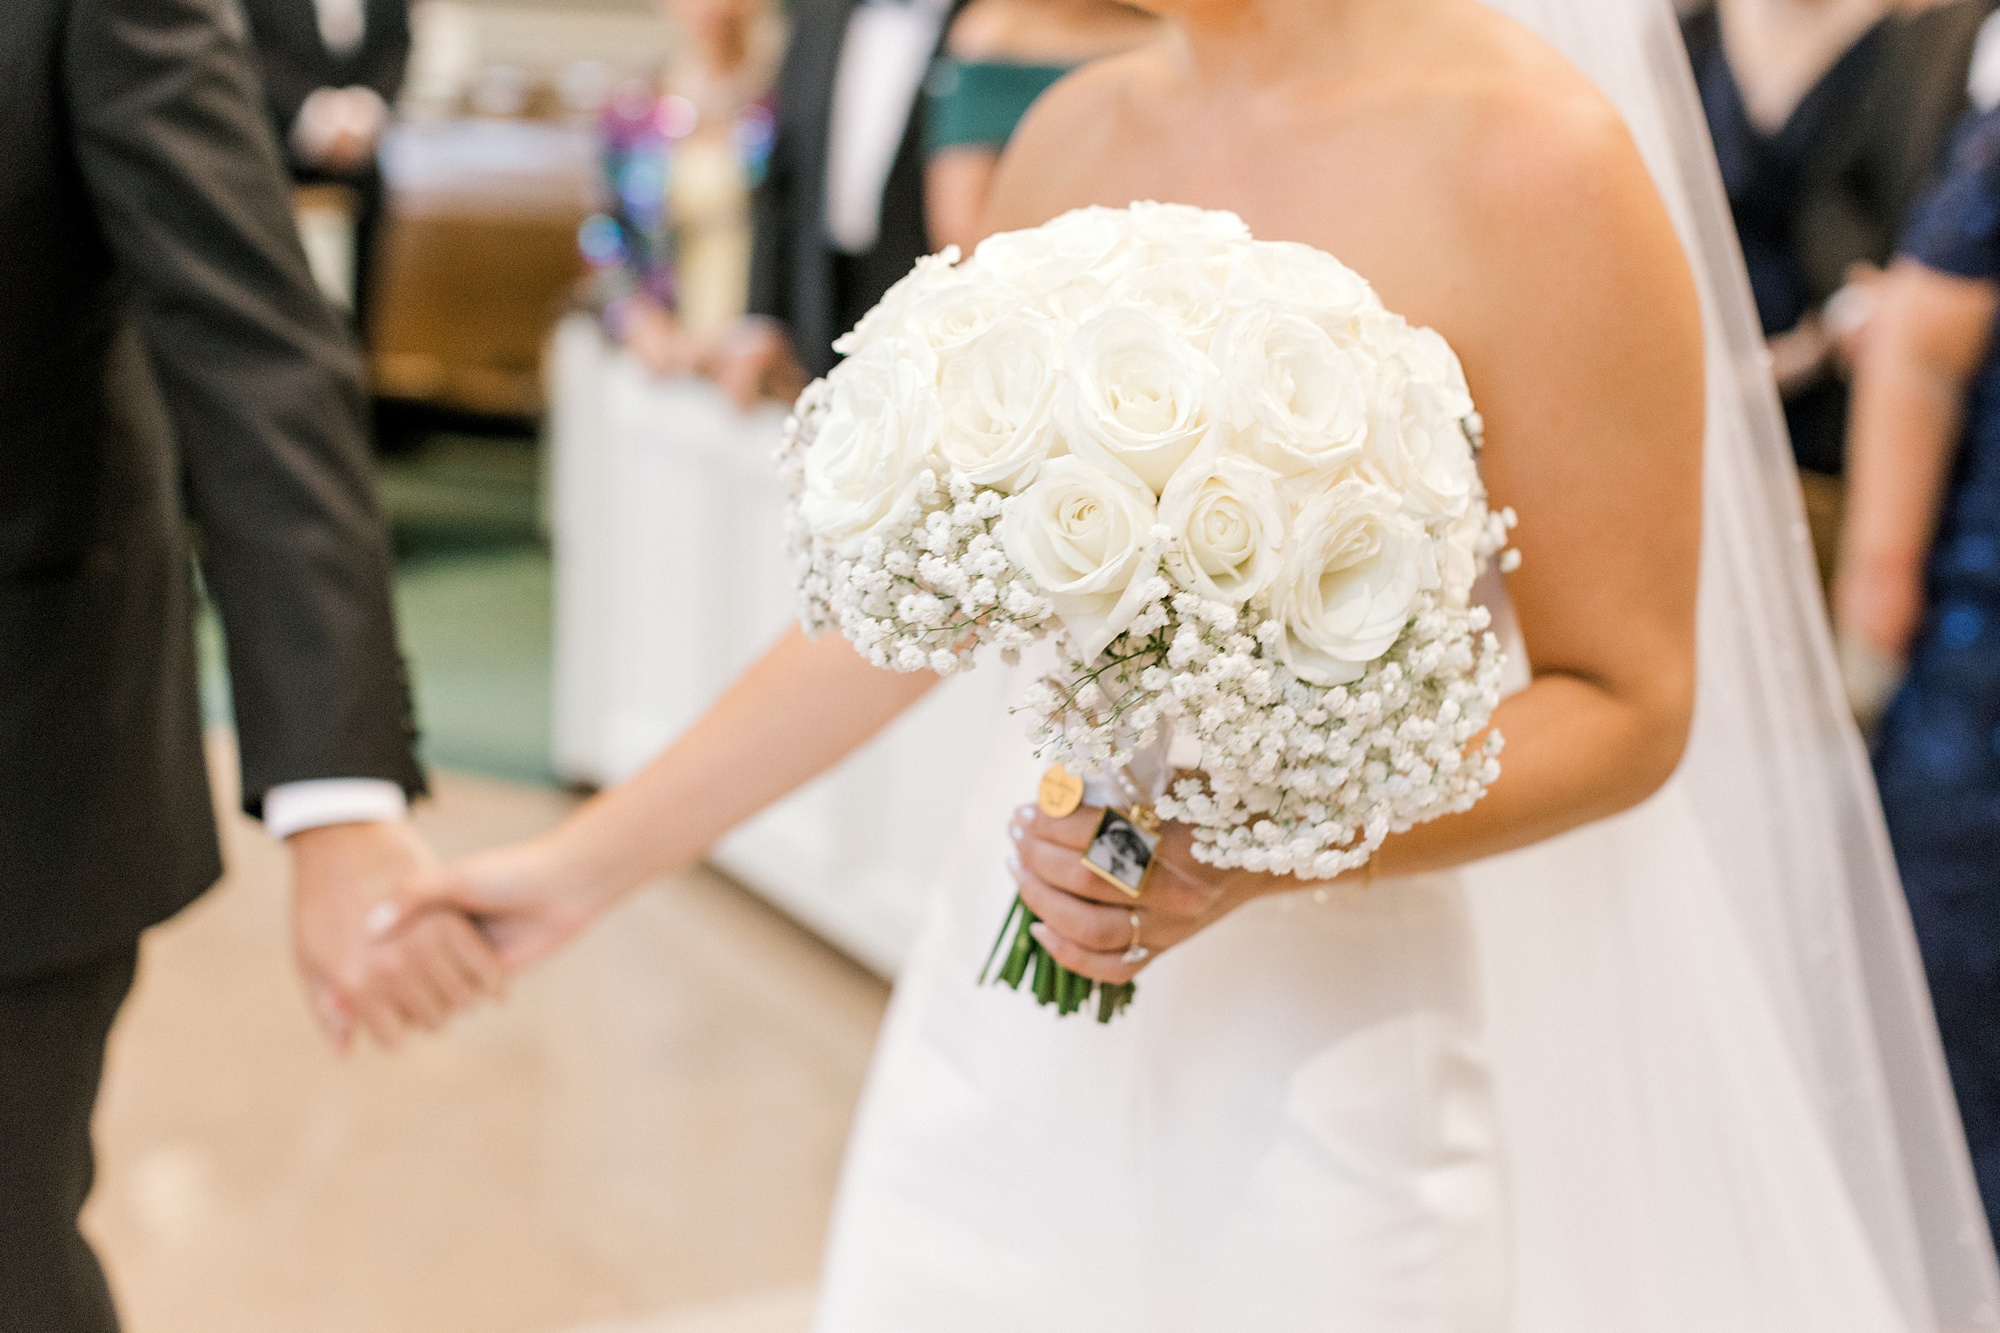 bride holds groom's hand and holds bouquet of white roses and baby's breath in the other